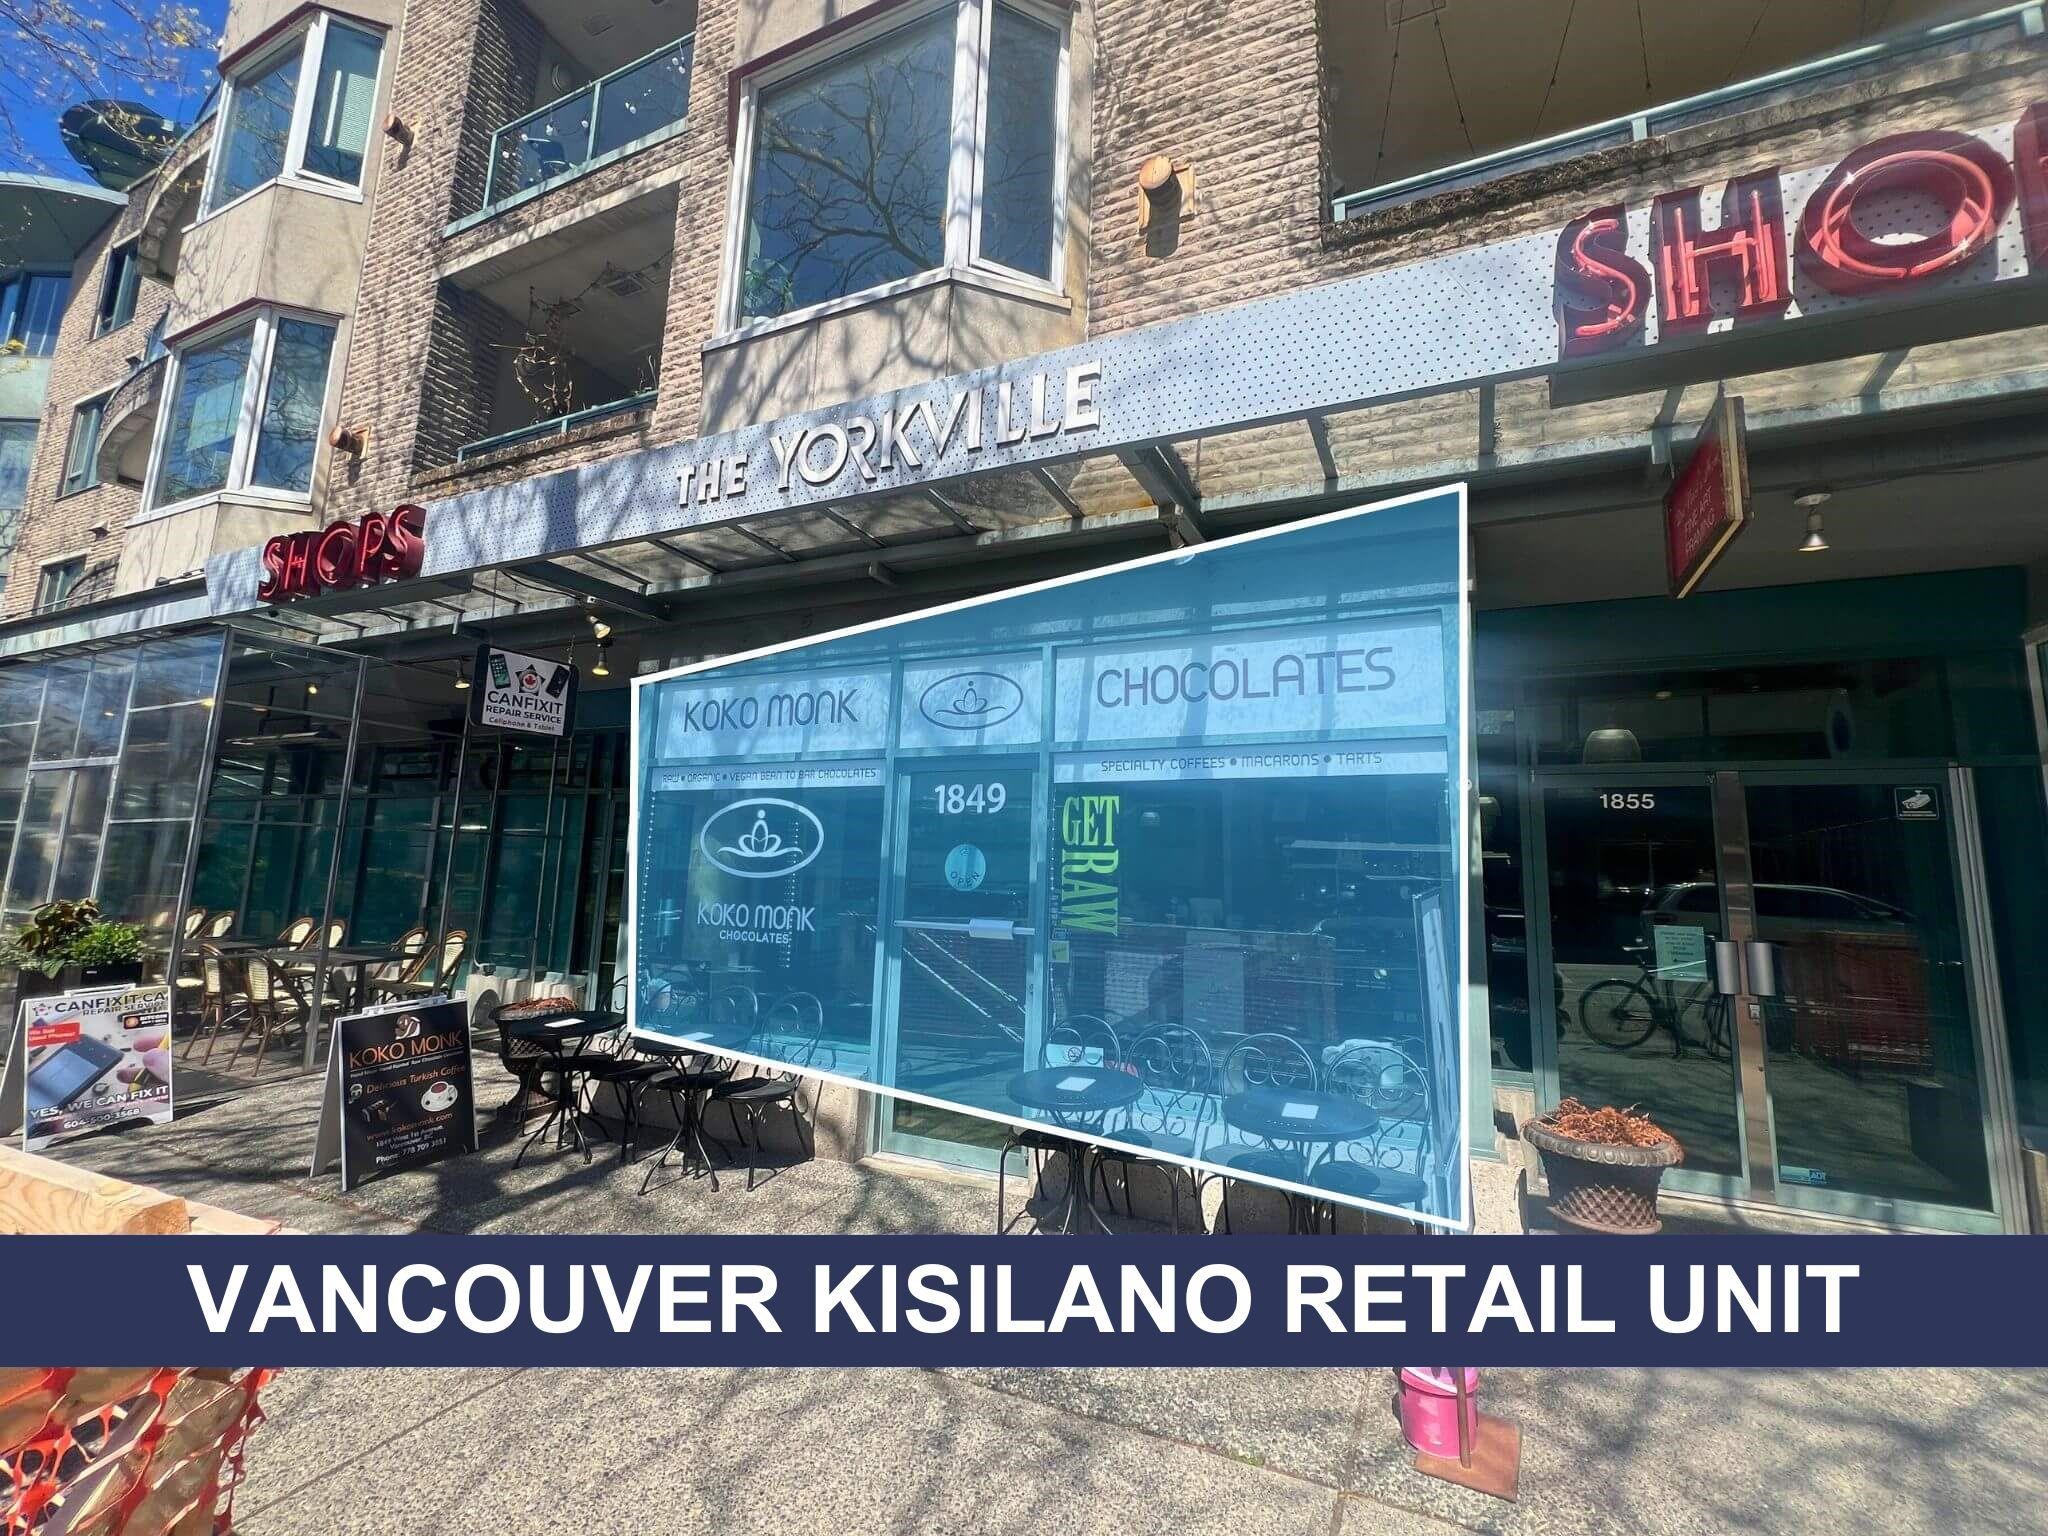 Kitsilano Land Commercial for sale:    (Listed 6800-05-17)